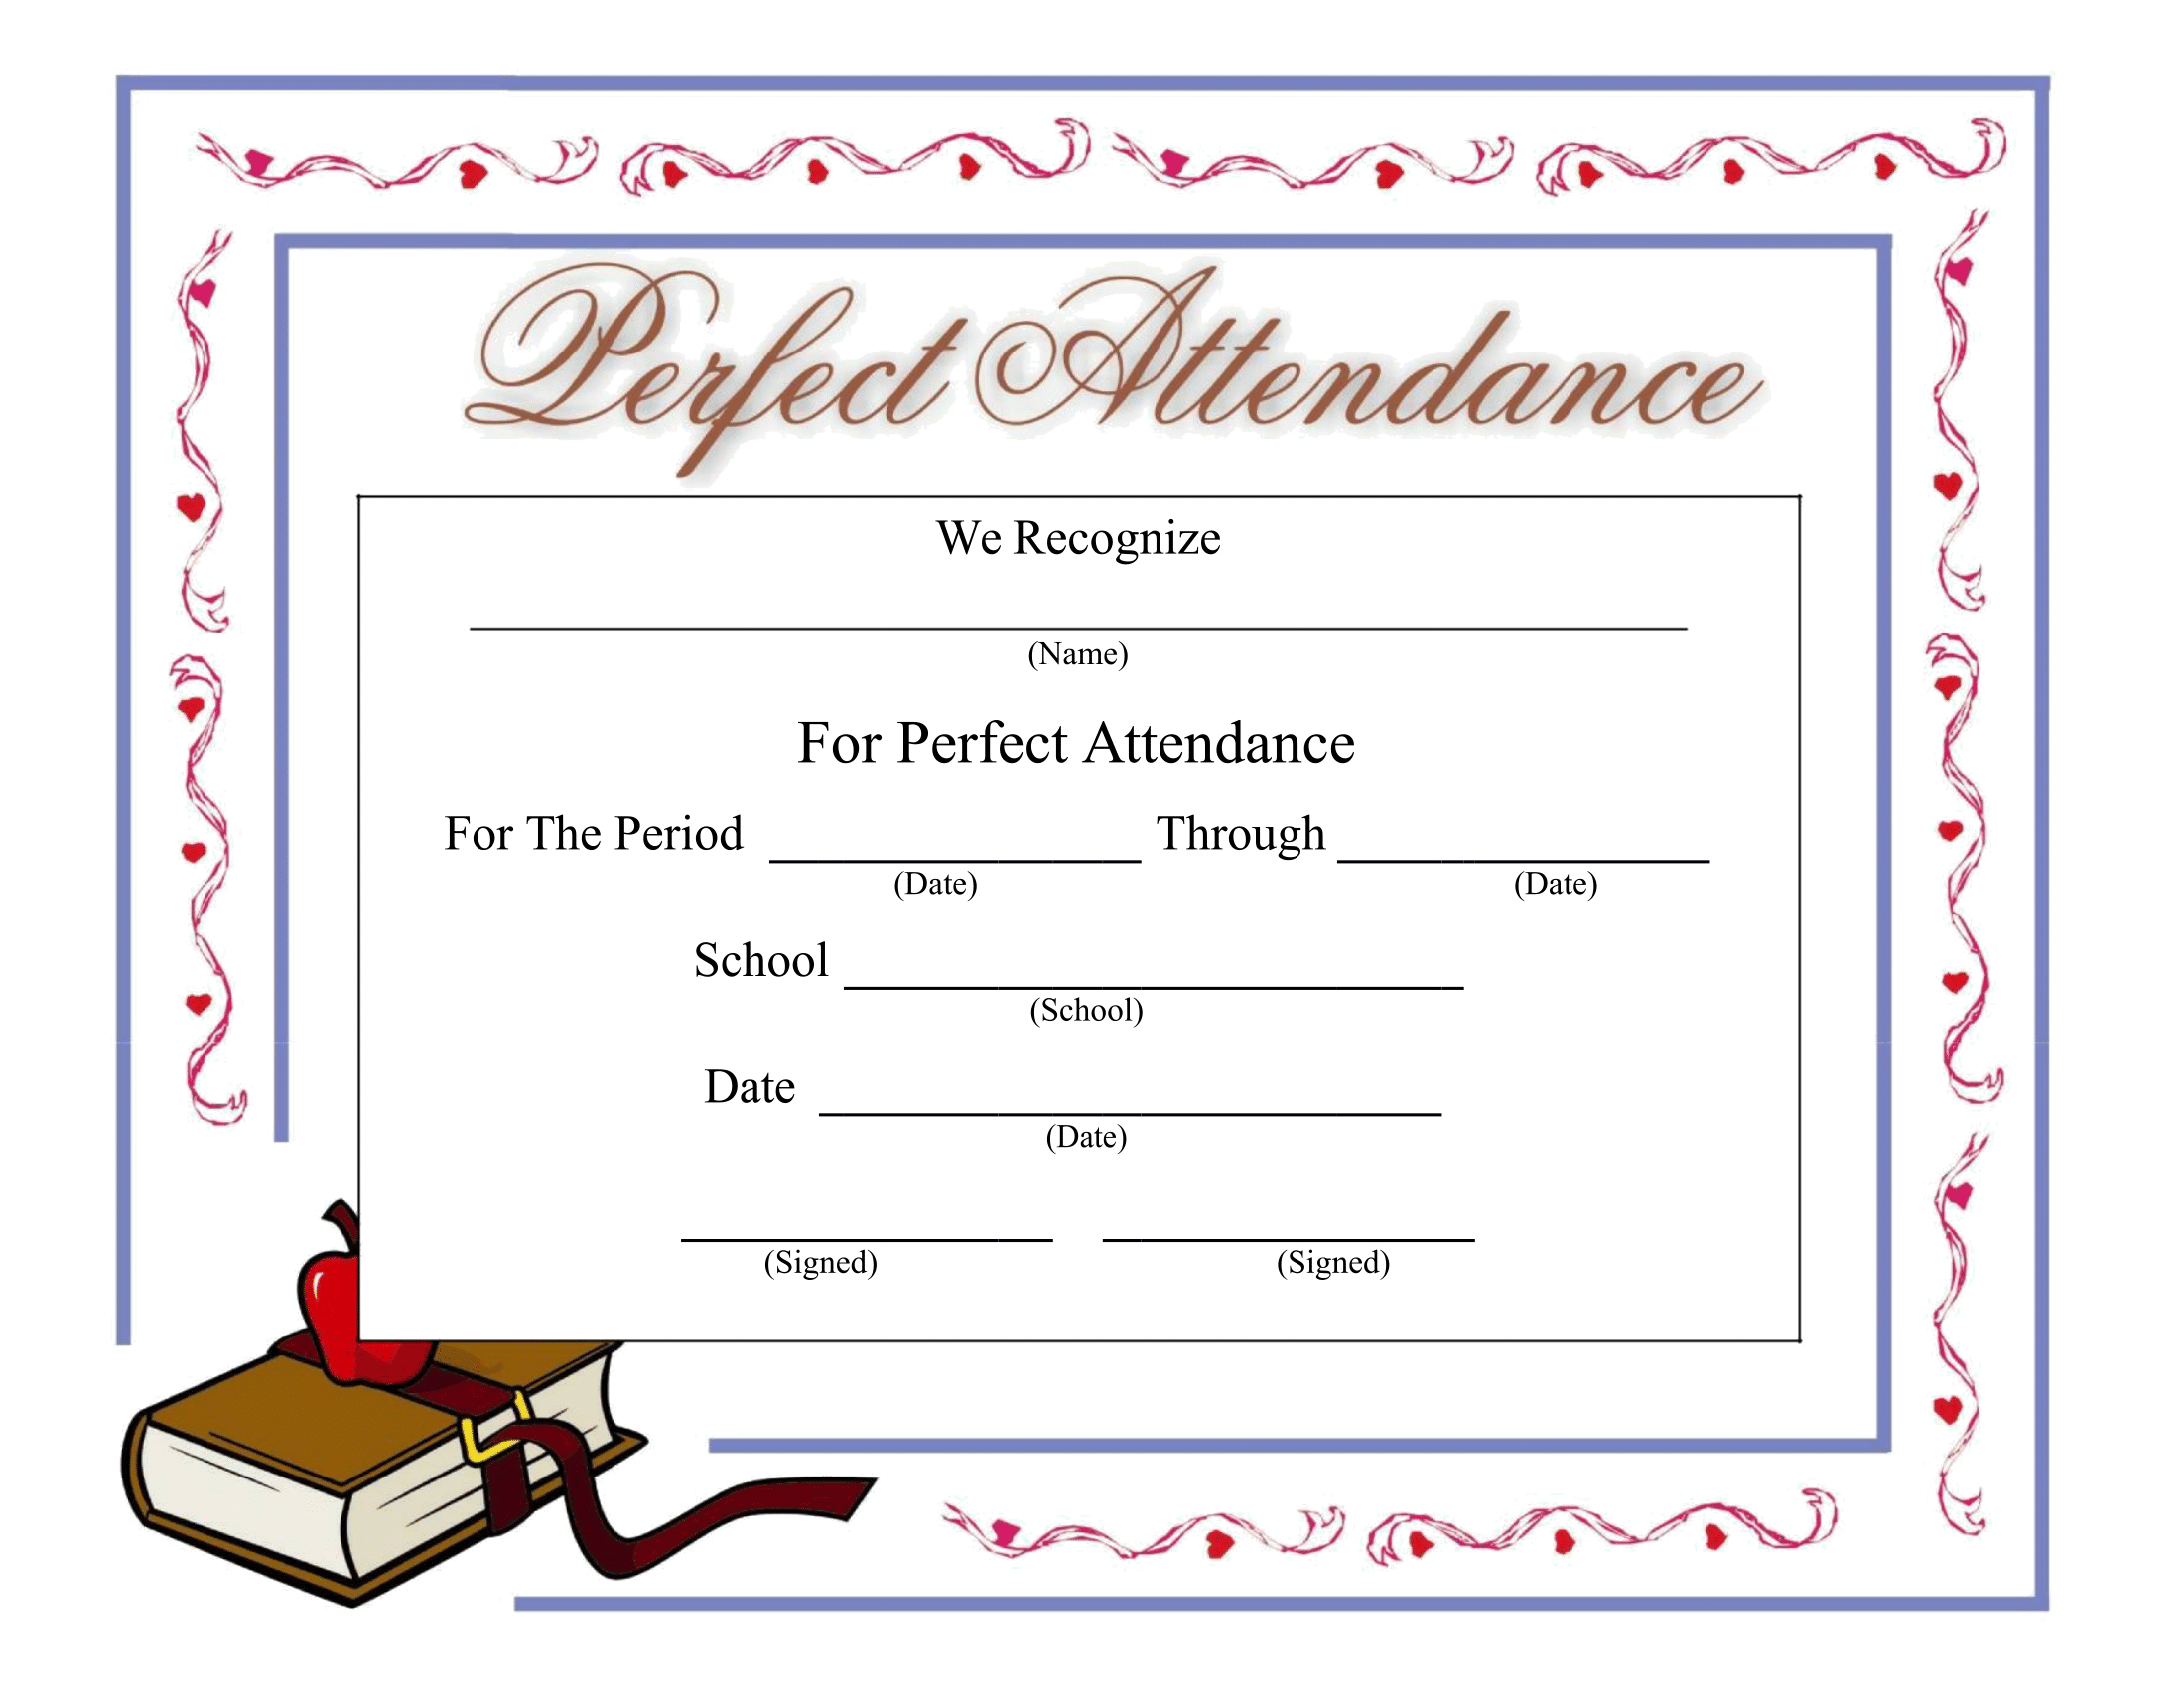 Perfect Attendance Certificate - Download A Free Template For Perfect Attendance Certificate Template